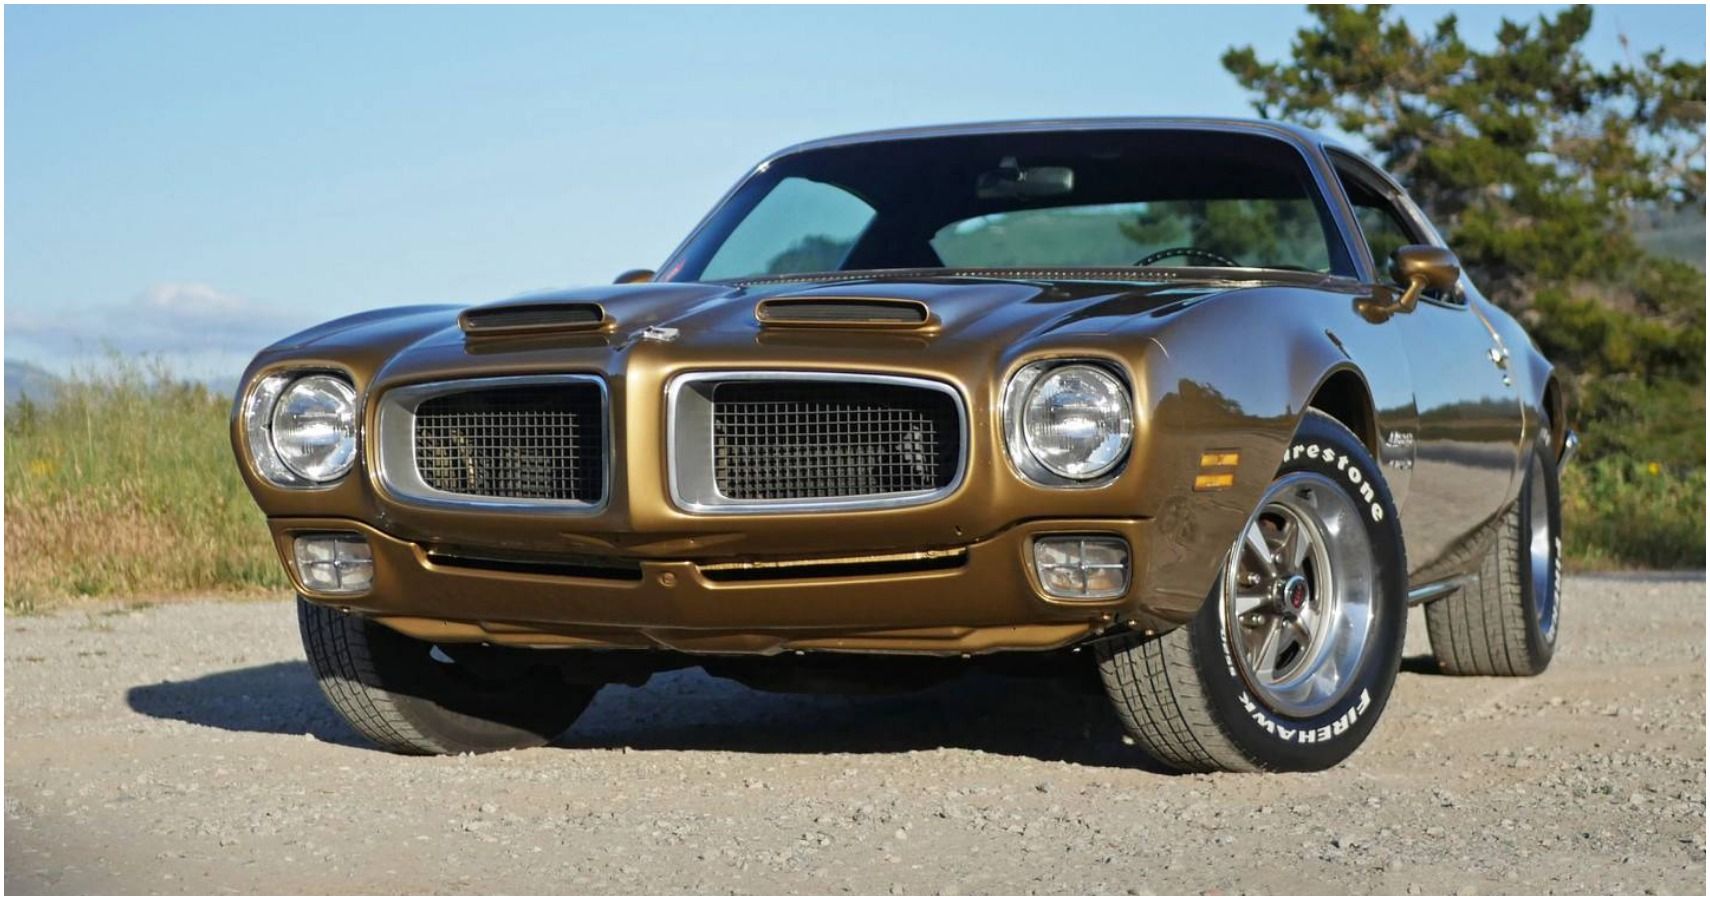 Everyone Wanted These Muscle Cars In The '70...Now They're Worthless